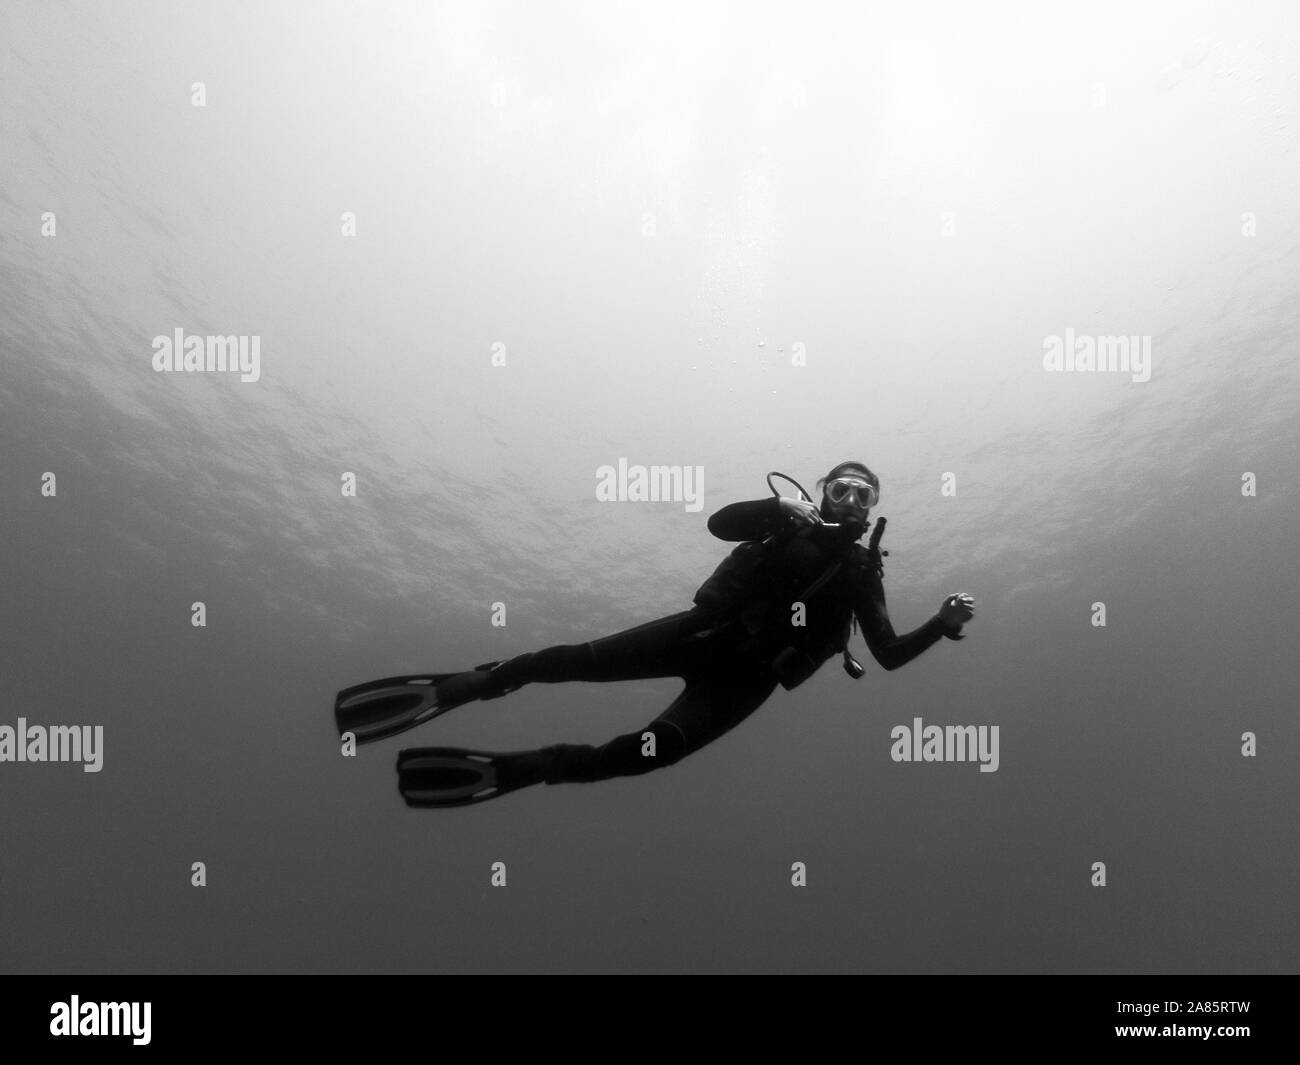 Image of a woman diver enjoying a dive in the waters of the Canary Islands. Diving sport Stock Photo